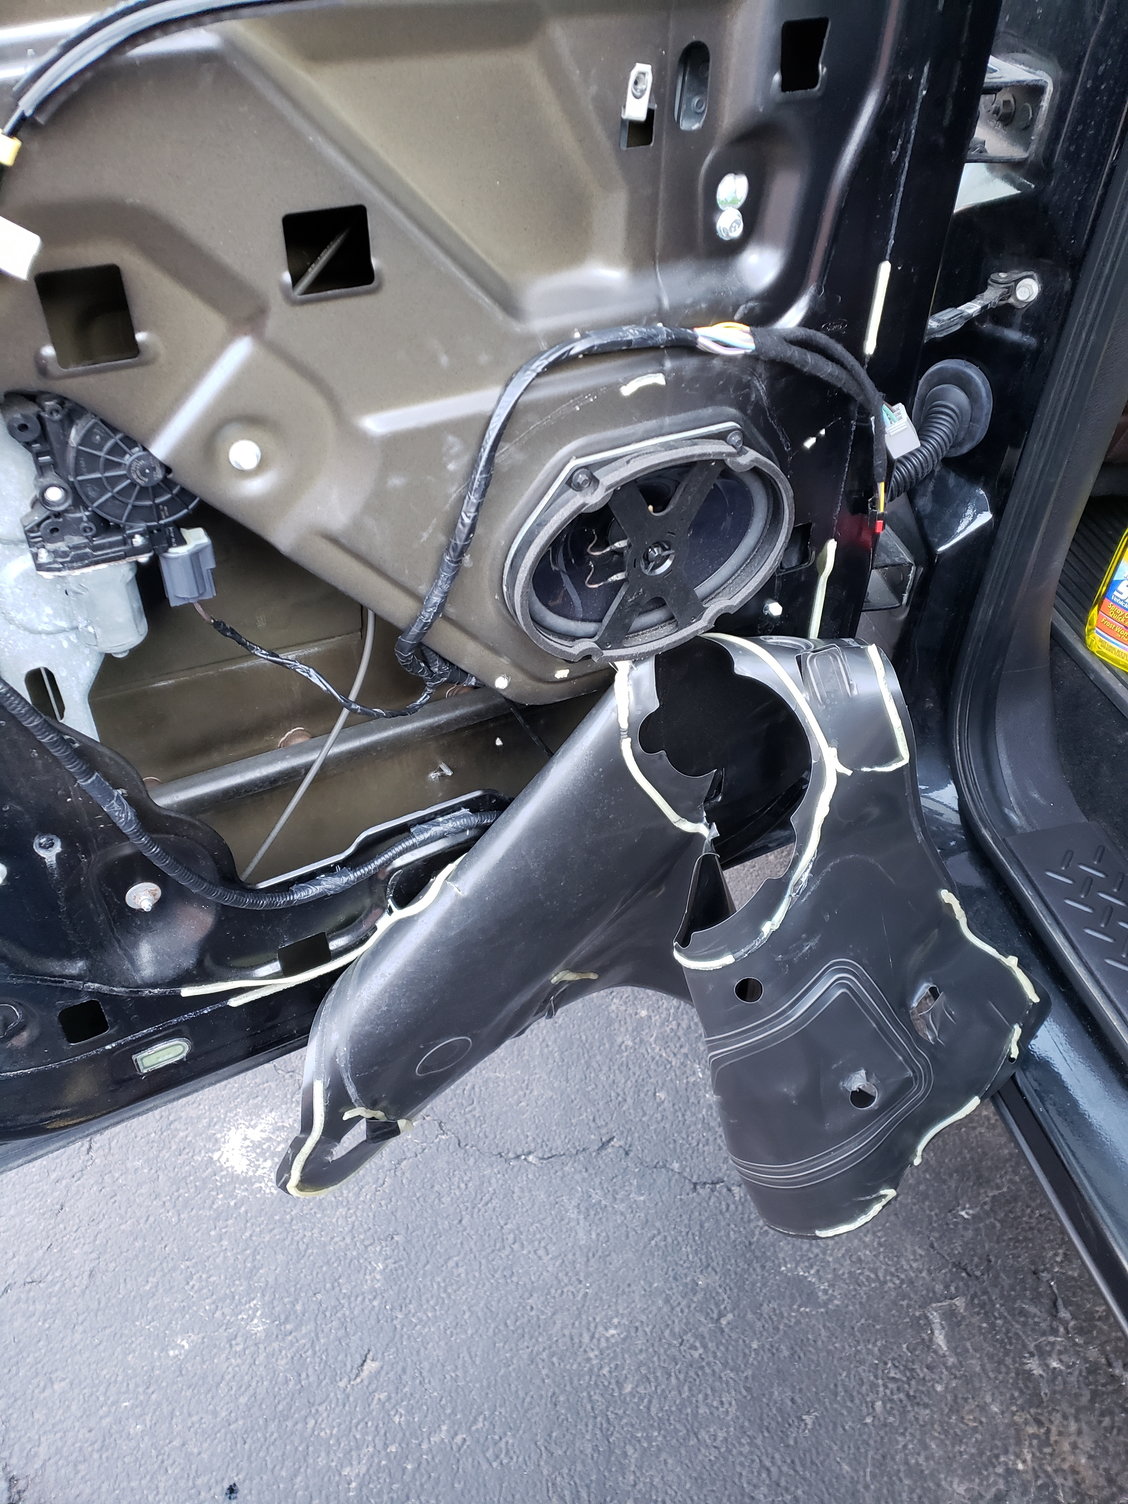 Left Rear Door Wiring - Ford F150 Forum - Community of Ford Truck Fans 2006 Ford F150 Door Ajar Switch Location